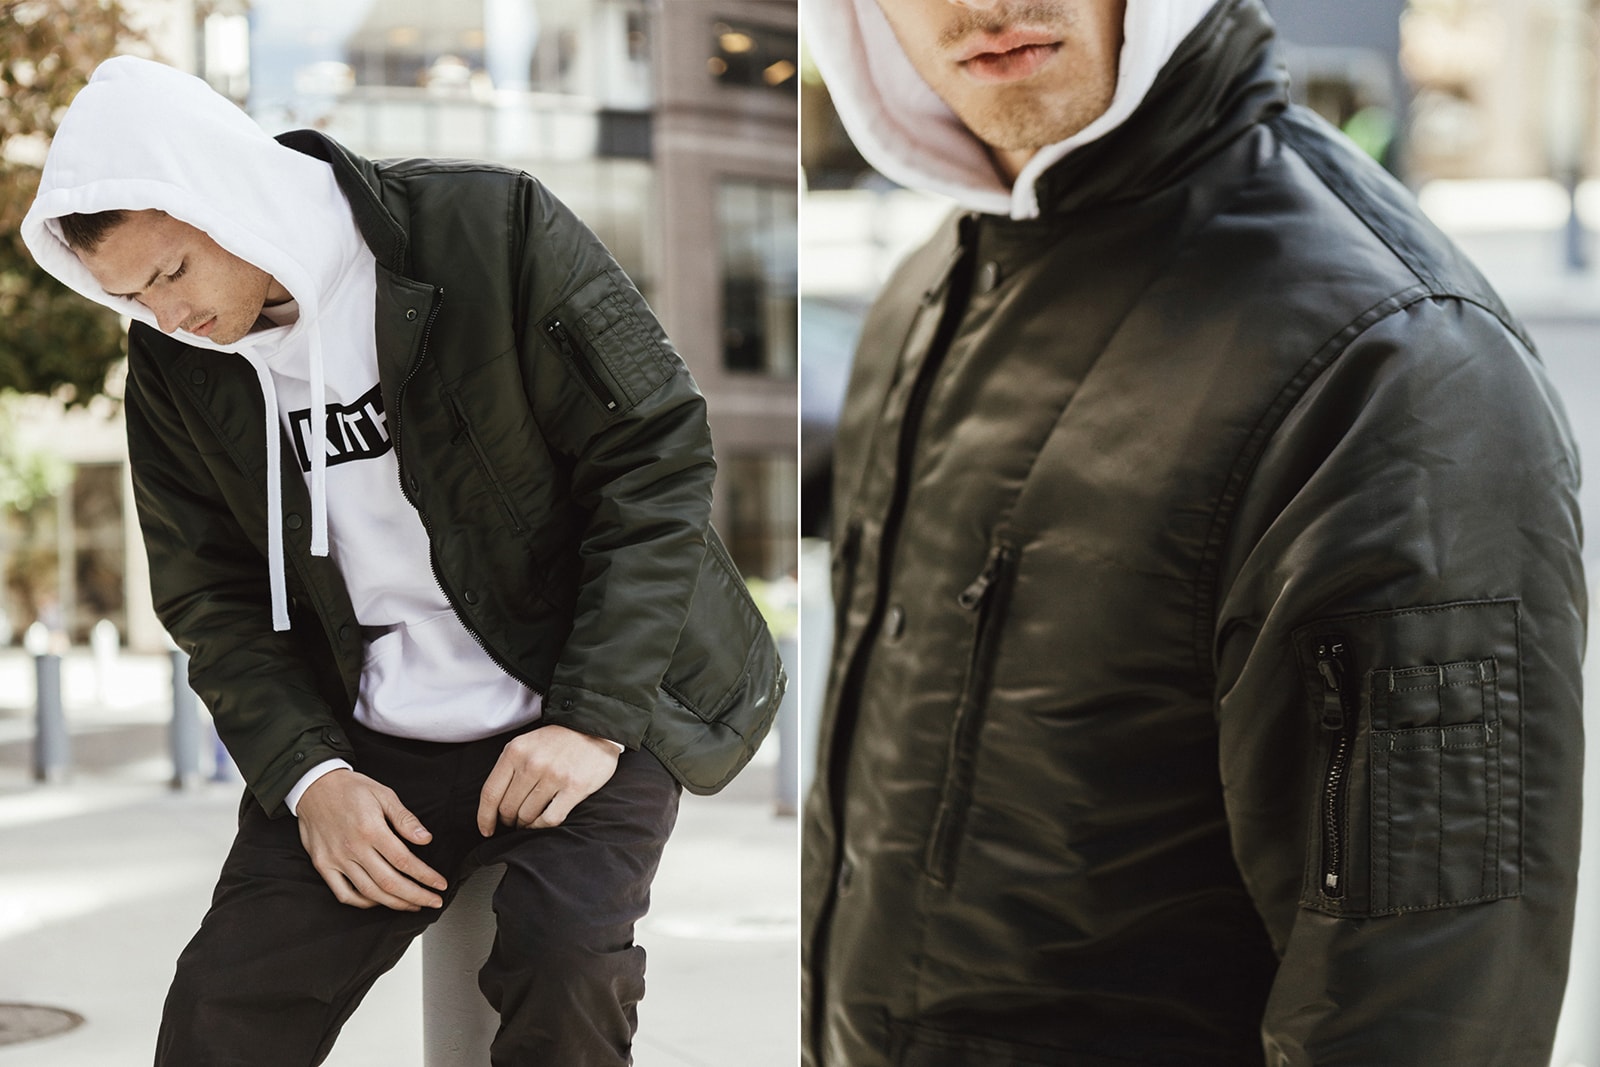 KITH 2016 Fall 2nd Delivery Lookbook